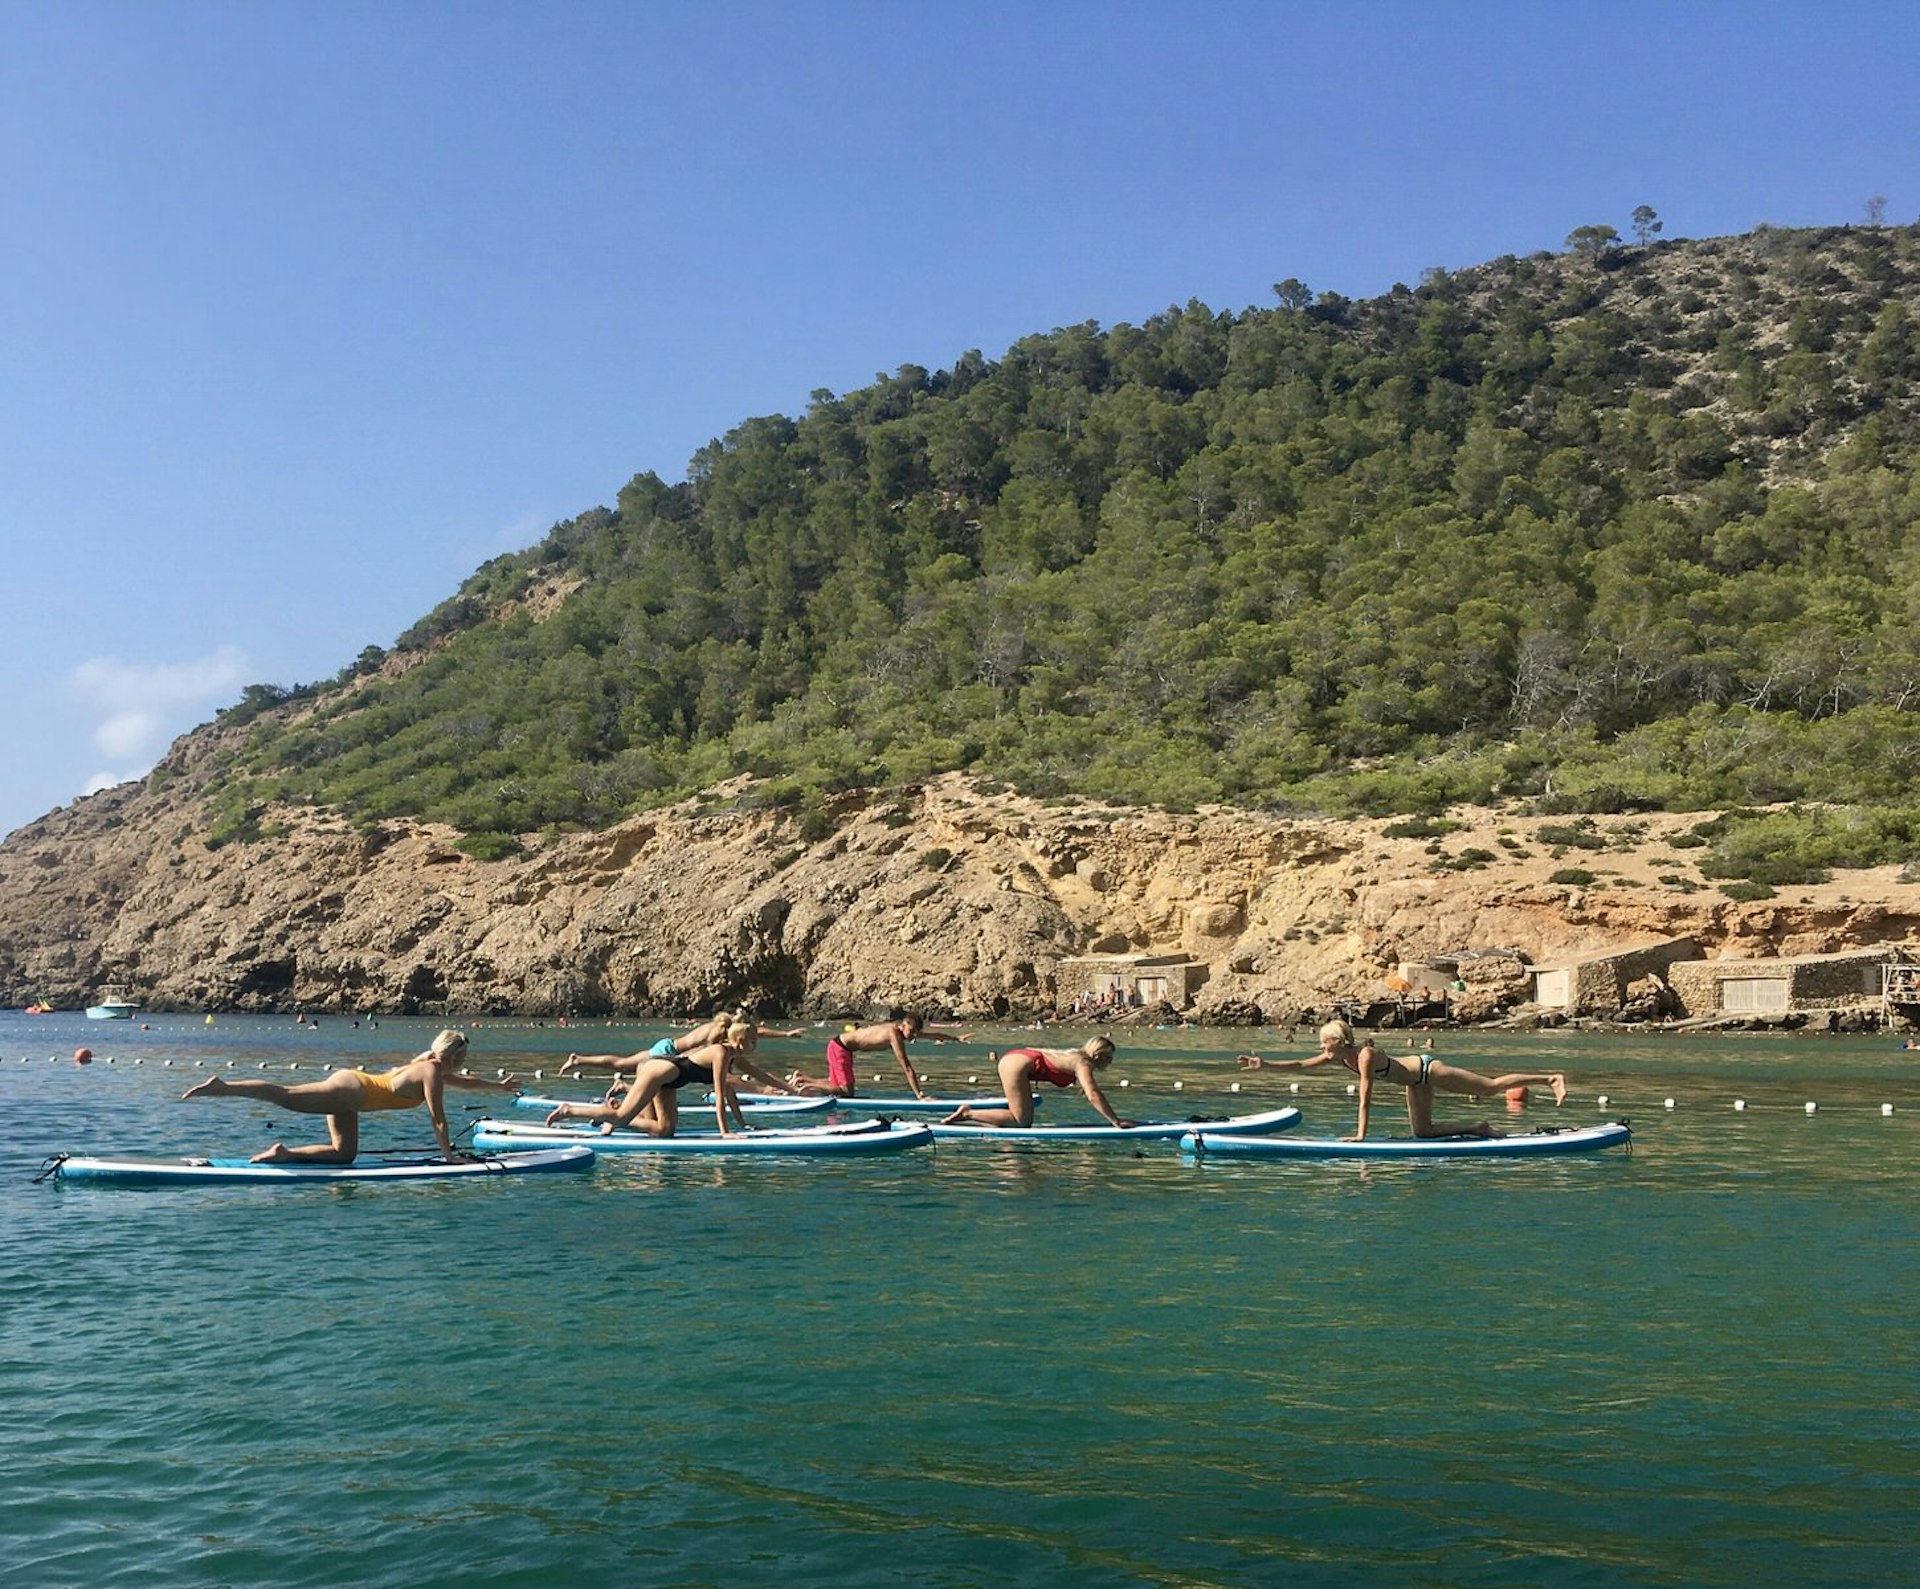 Ibiza spa break - several people practising pilates on stand up paddle boards on a deep blue sea with lush green hills in the background